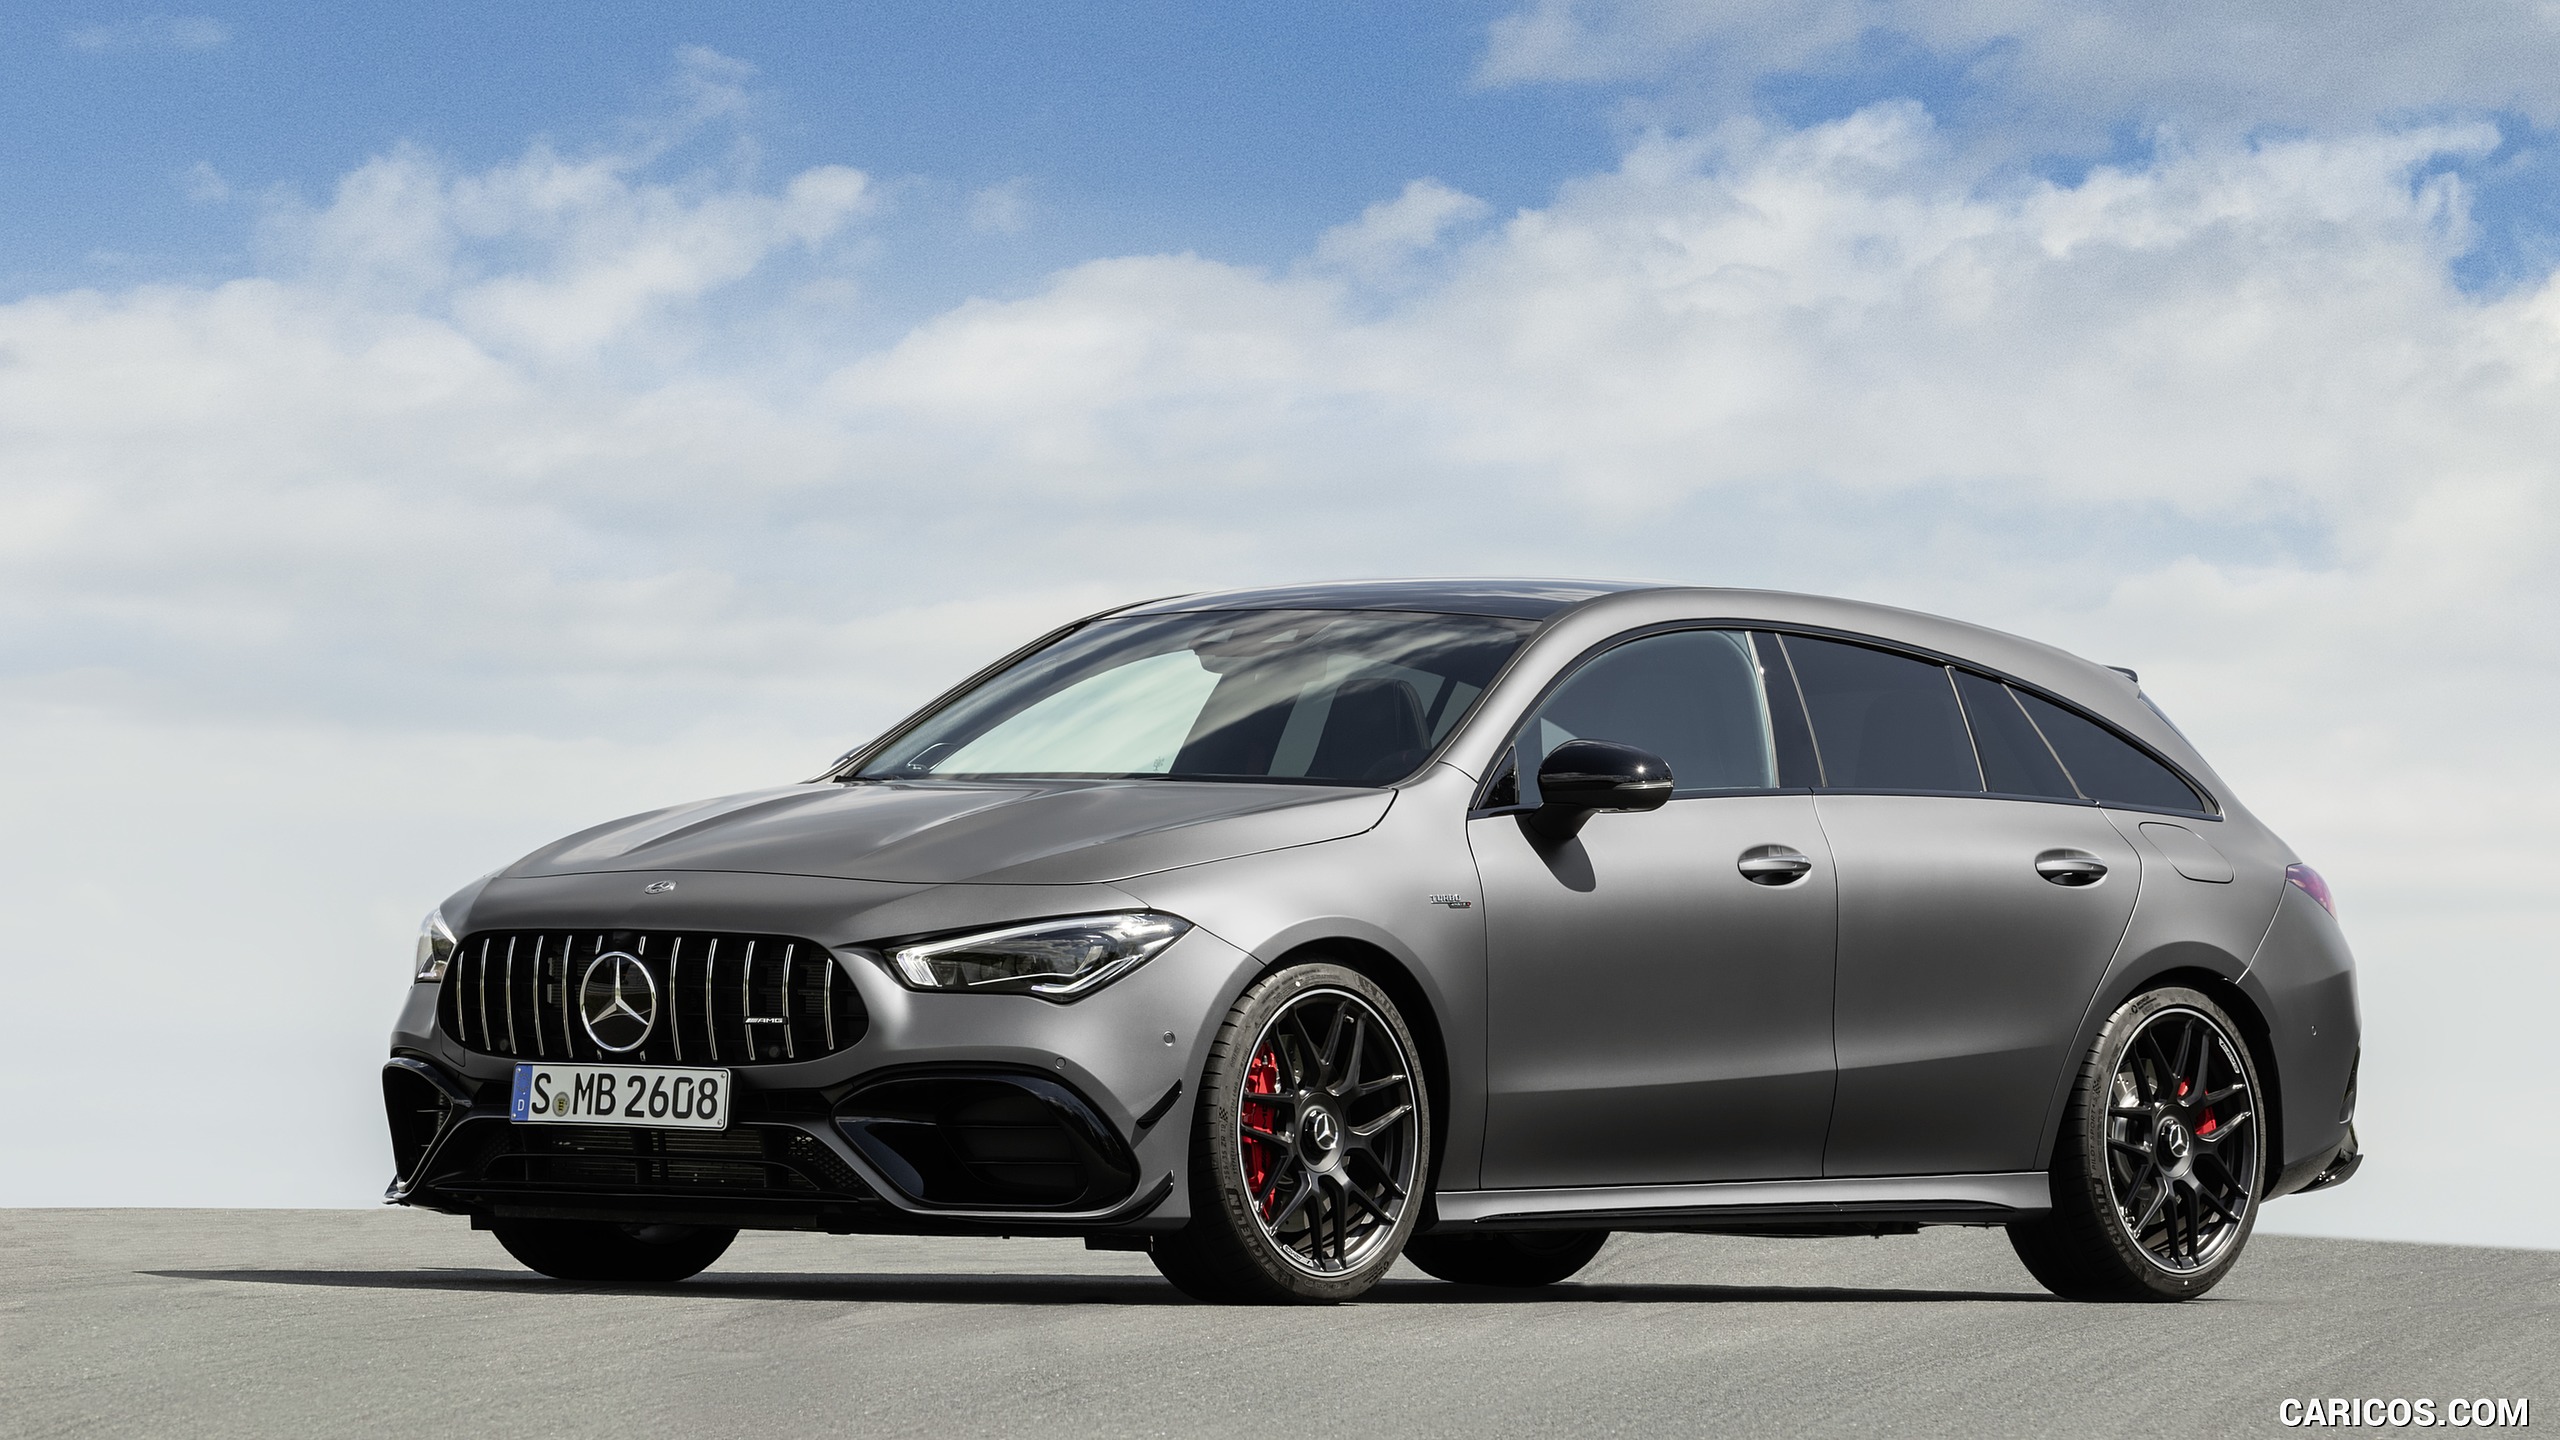 2020 Mercedes-AMG CLA 45 S 4MATIC+ Shooting Brake - Front Three-Quarter, #16 of 35